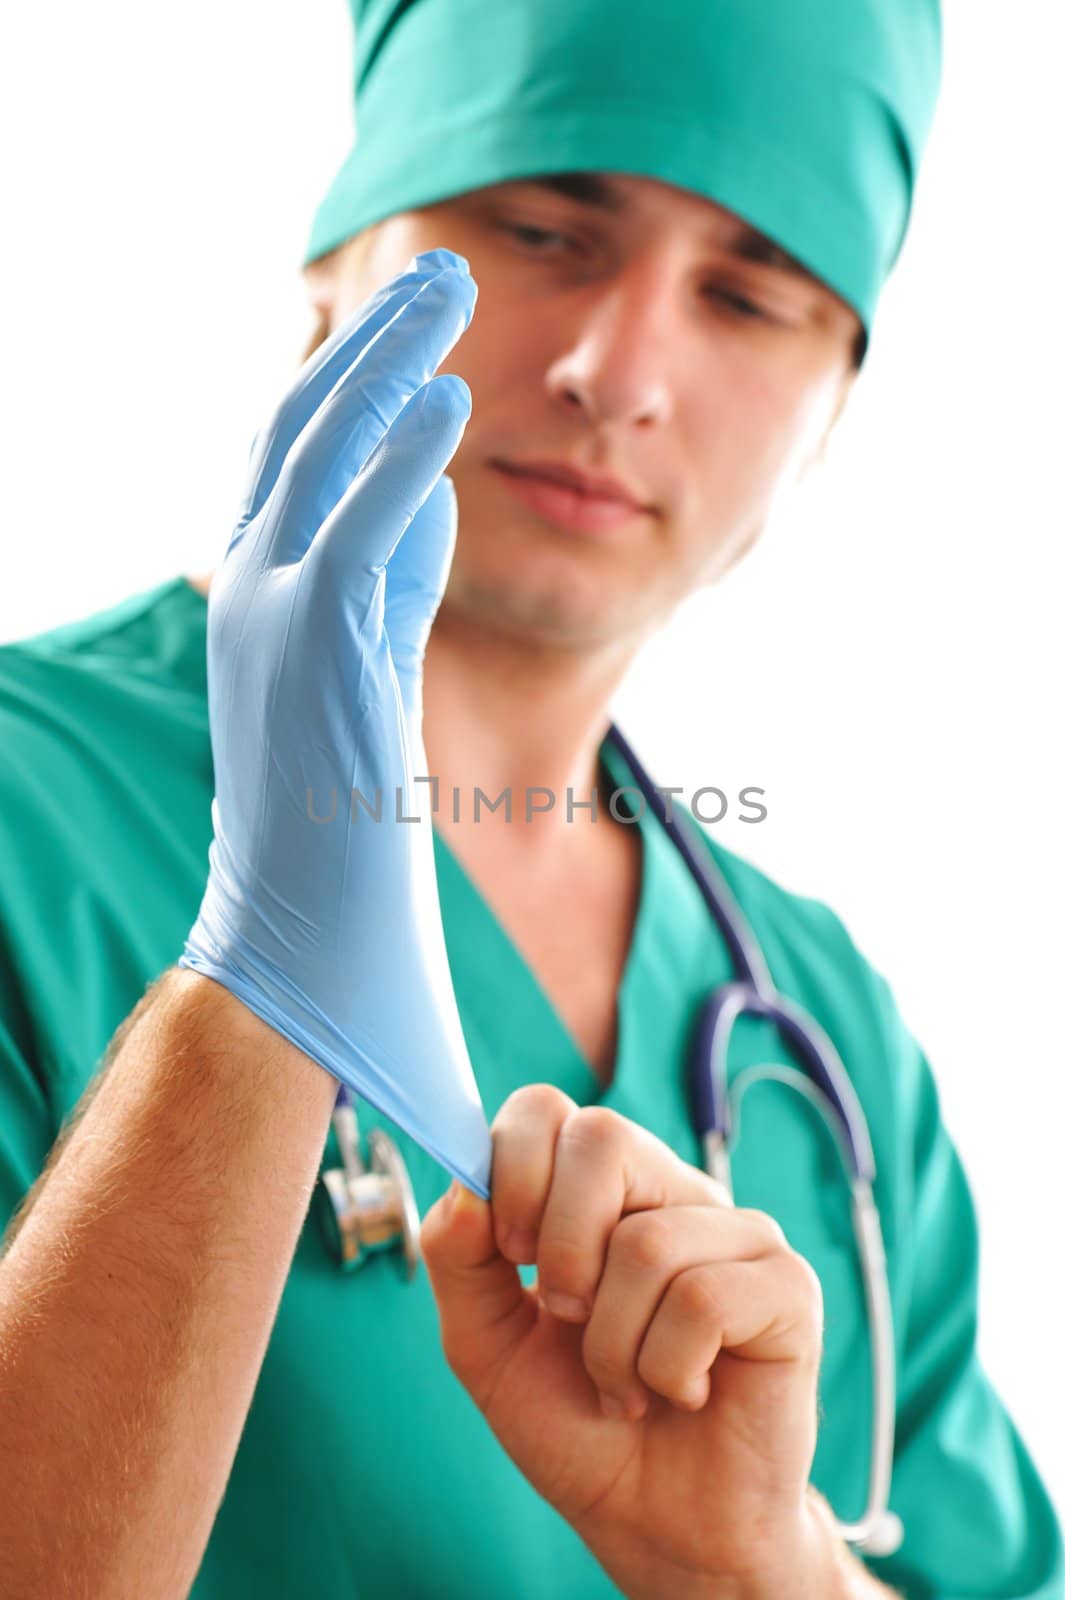 Doctor pulling on surgical glove